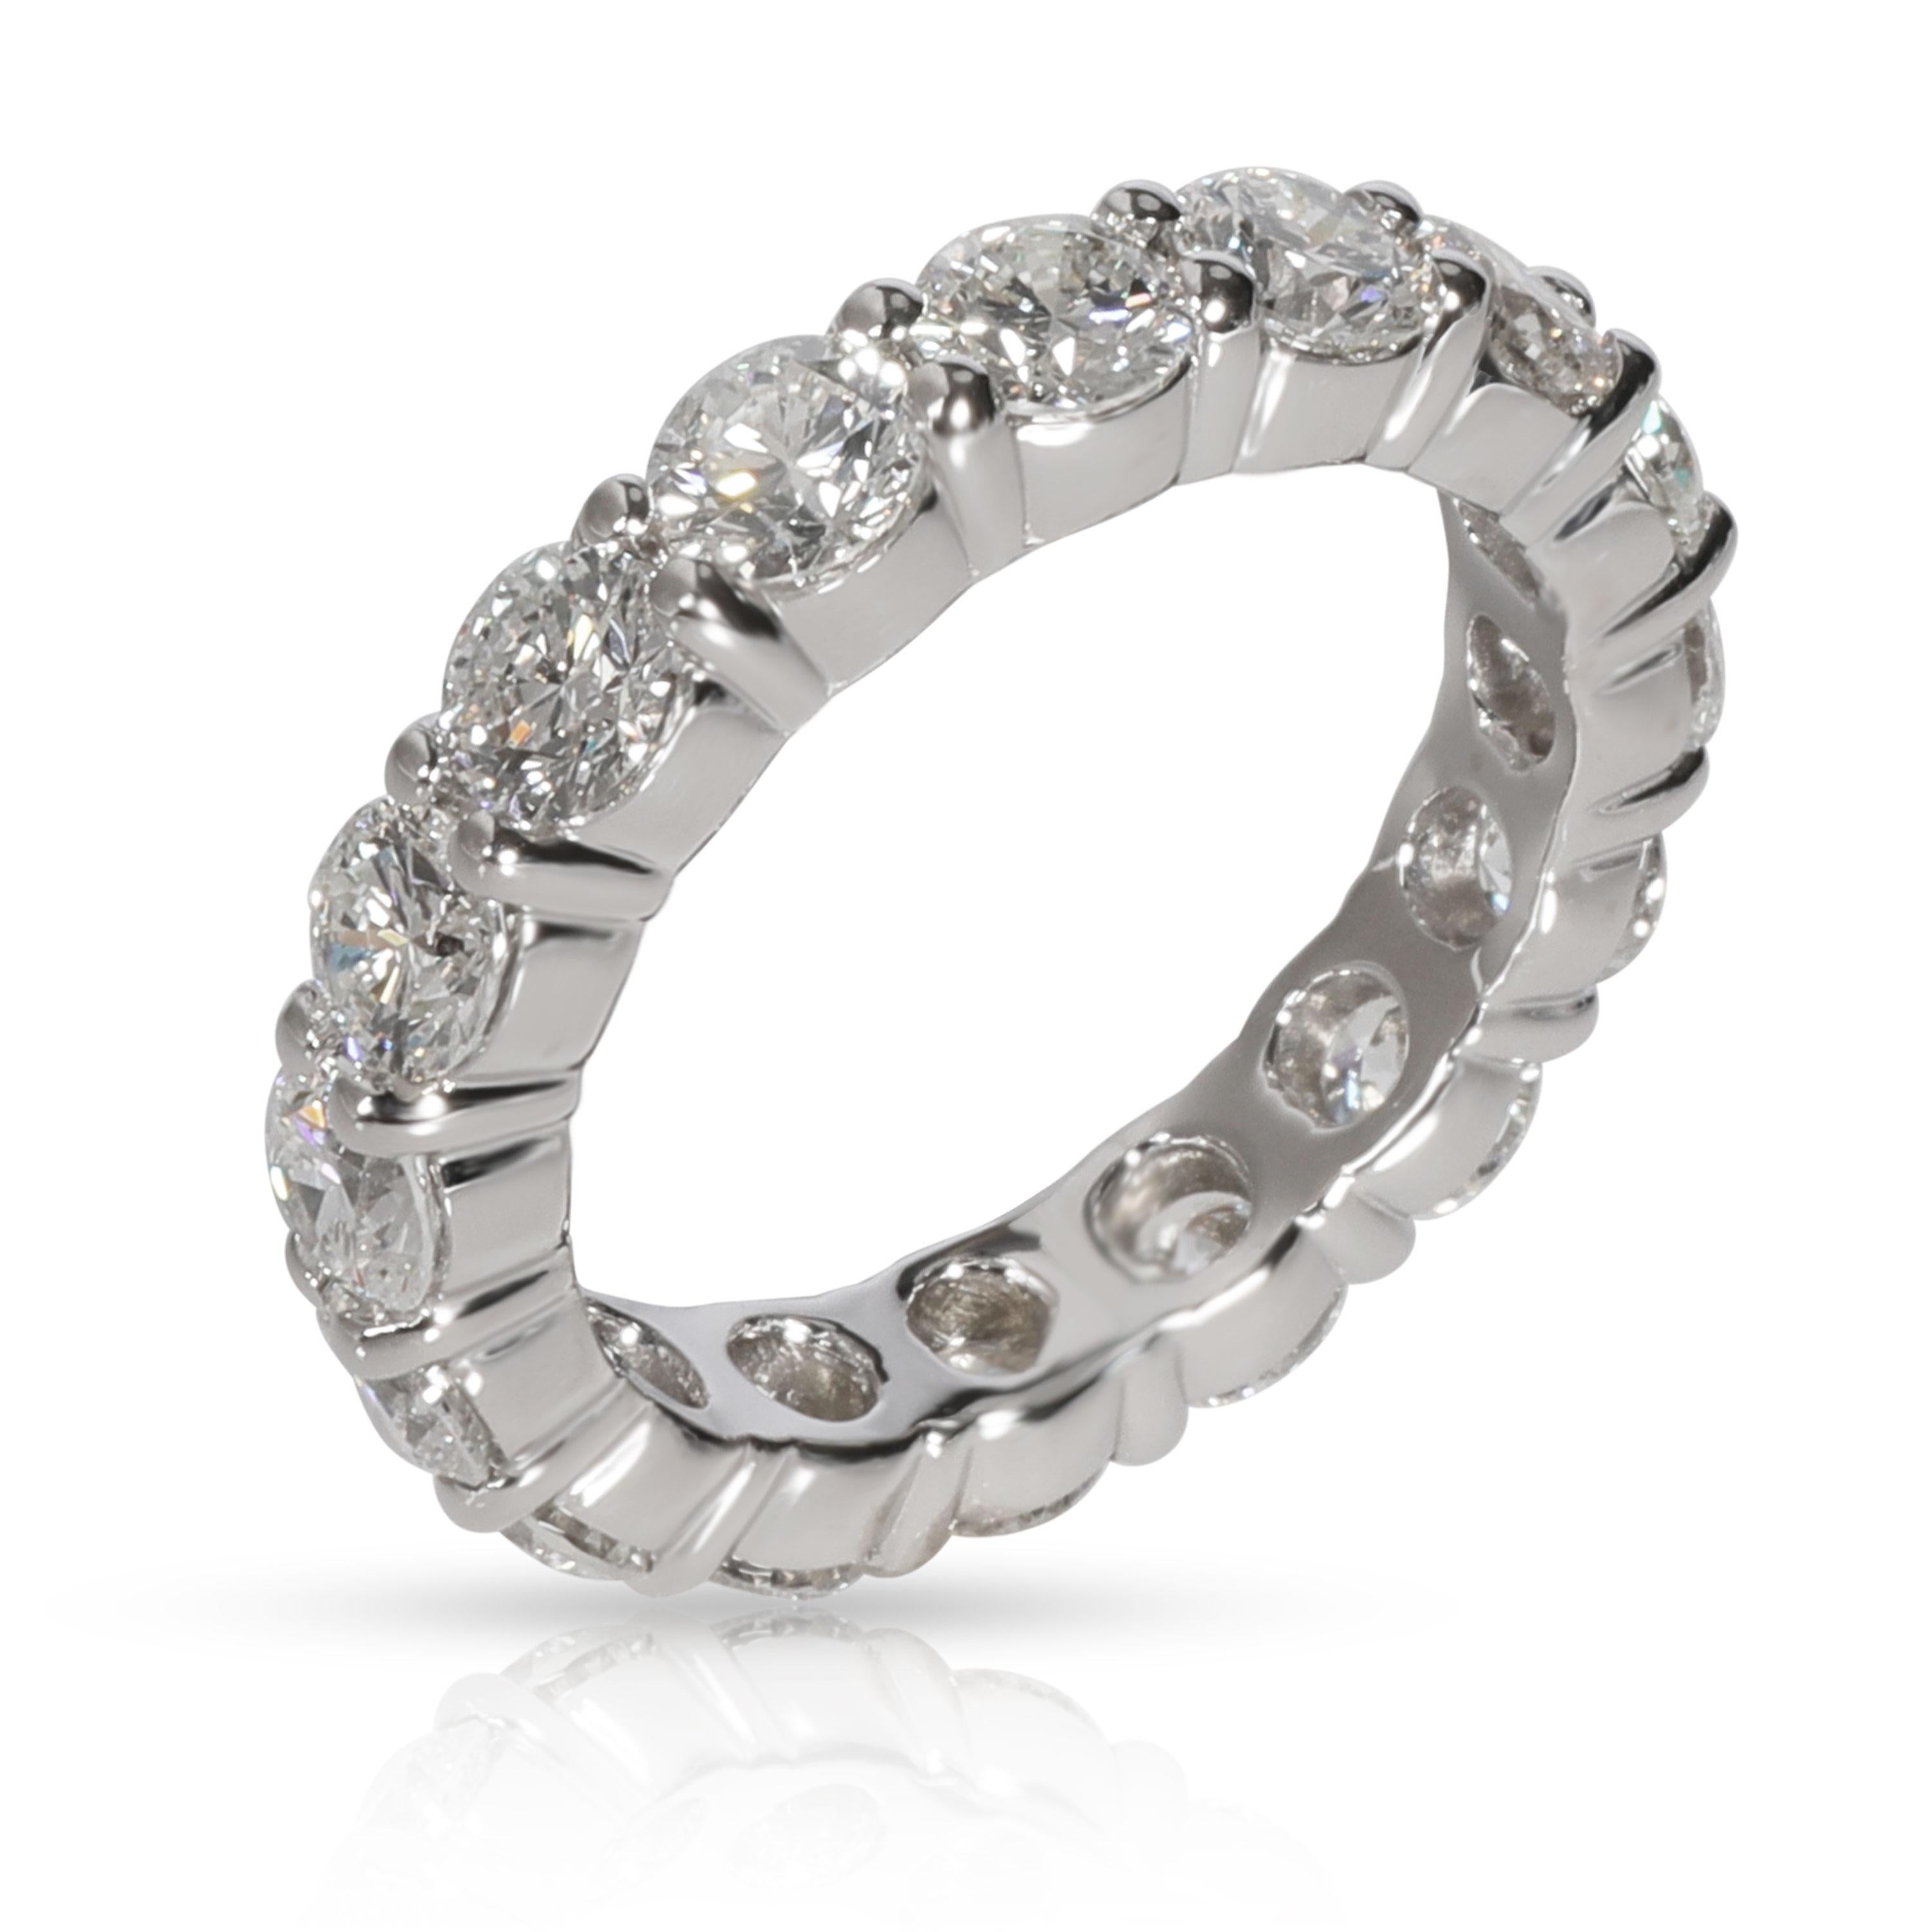 
PRIMARY DETAILS
SKU: 107671
Listing Title: Round cut Diamond Eternity Band in 14K White Gold 4.00 CTW
Condition Description: Retails for 9,600 USD. In excellent condition and recently polished. Ring size is 6.75.
Metal Type: White Gold
Metal